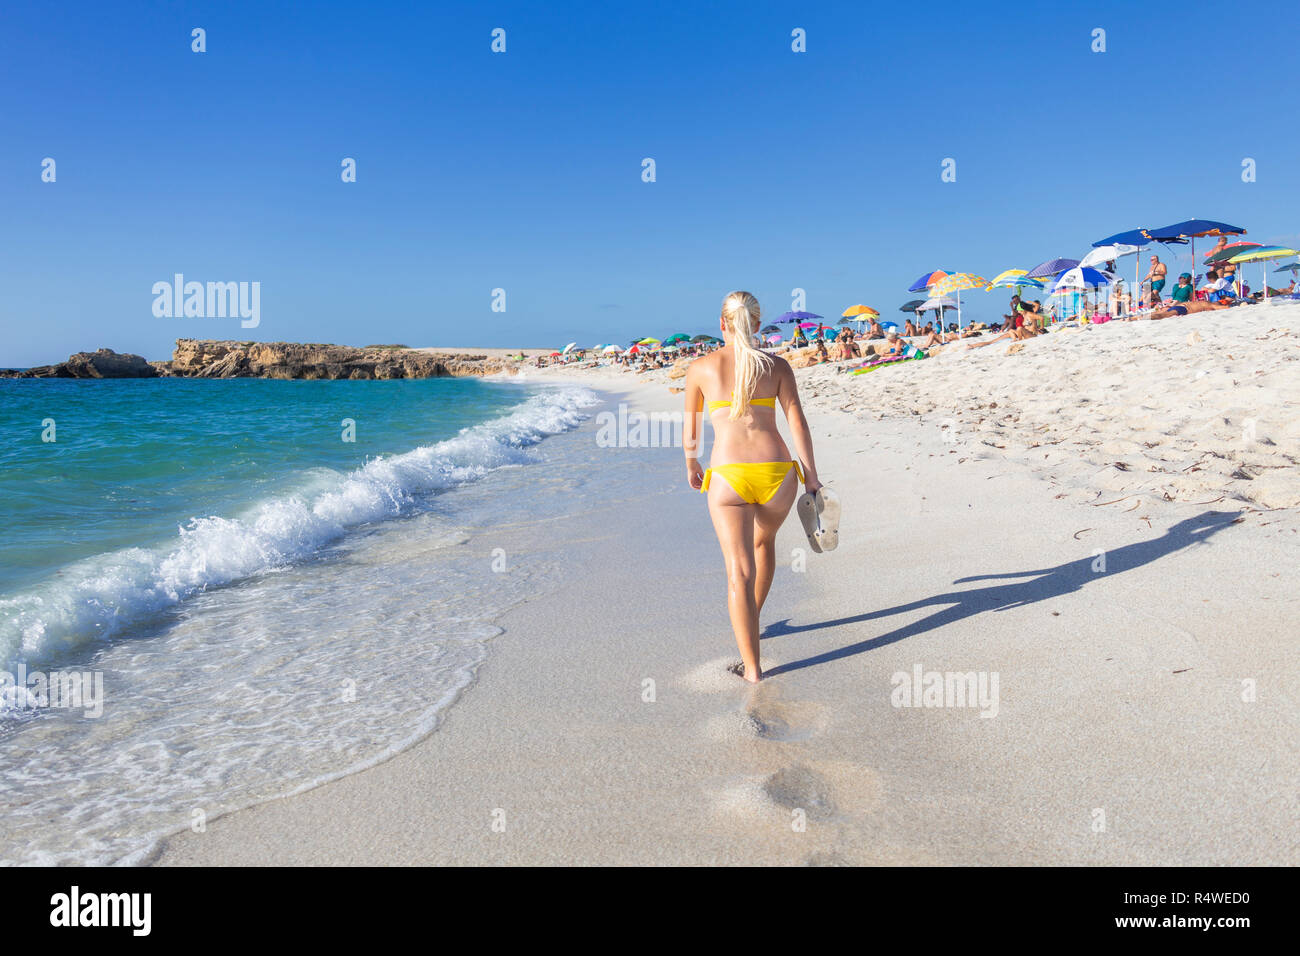 Young girl wit yellow swimsuit walks on the beach of Is Arutas, Cabras, Oristano province, Sardinia, Italy, Europe. Stock Photo